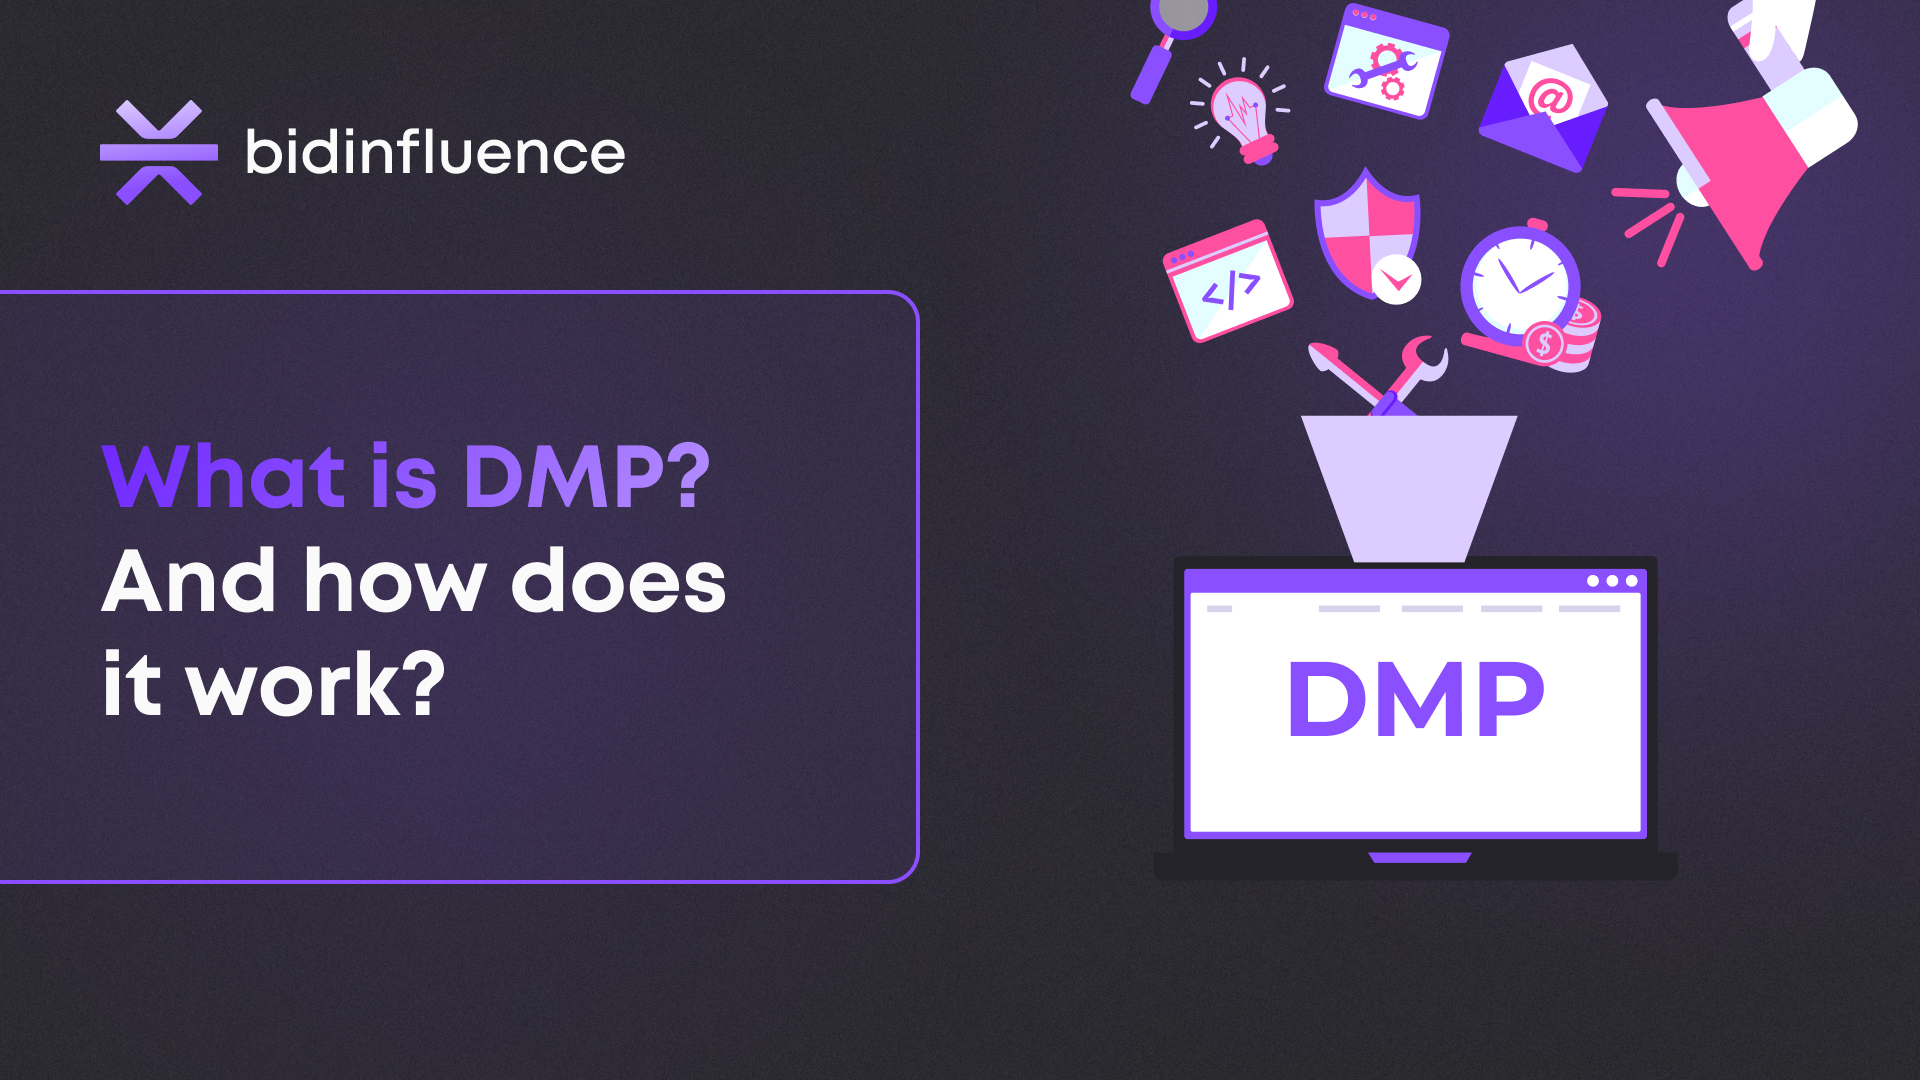 What is DMP and how does it work